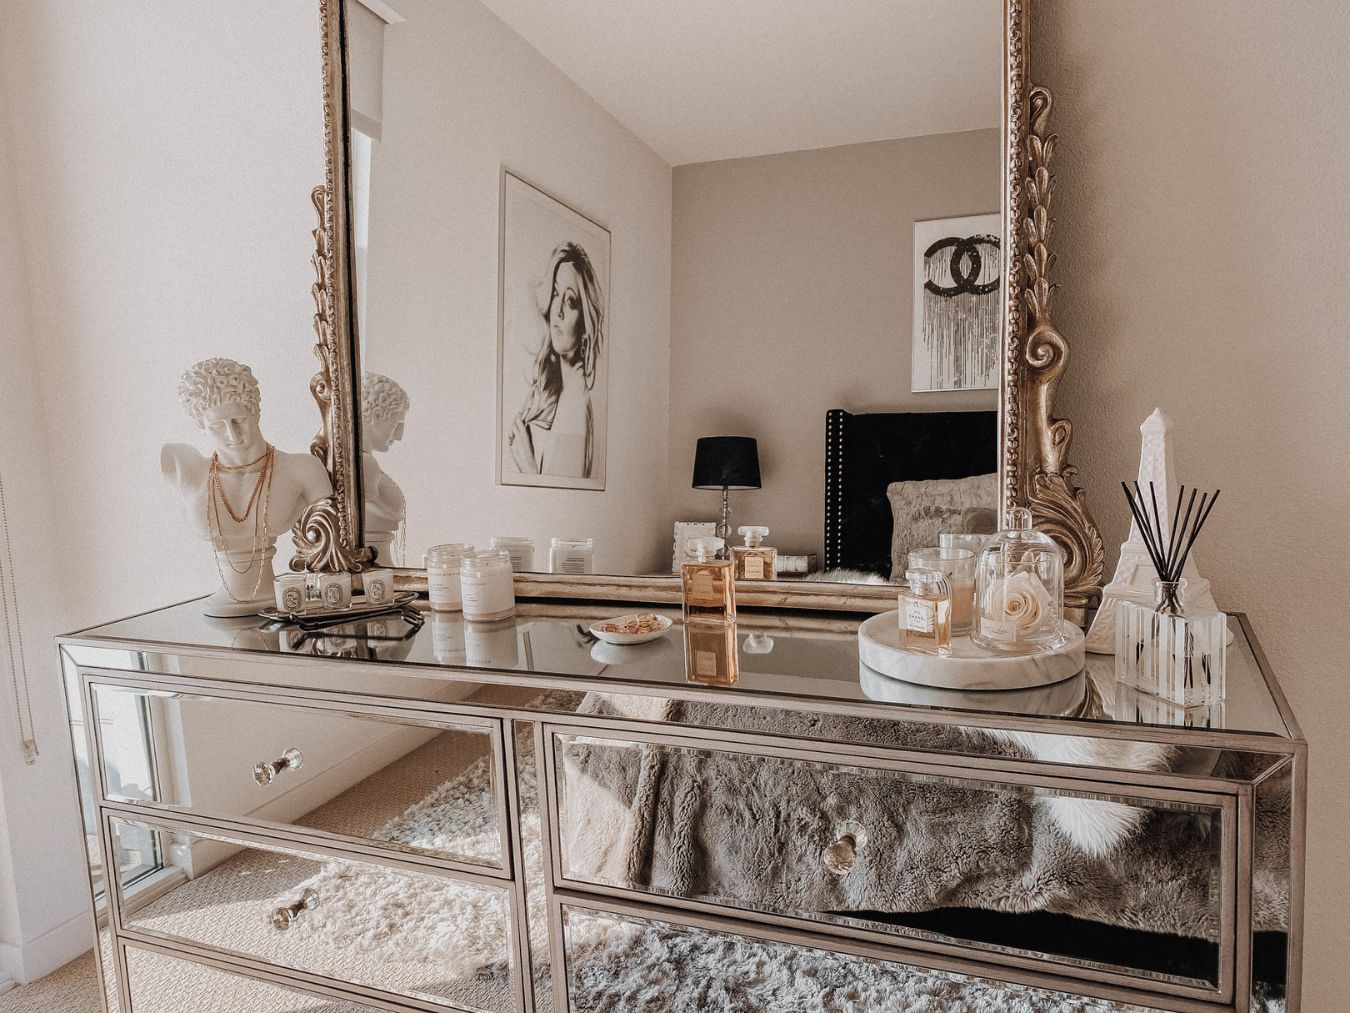 How To Decorate A Dresser With A Mirror